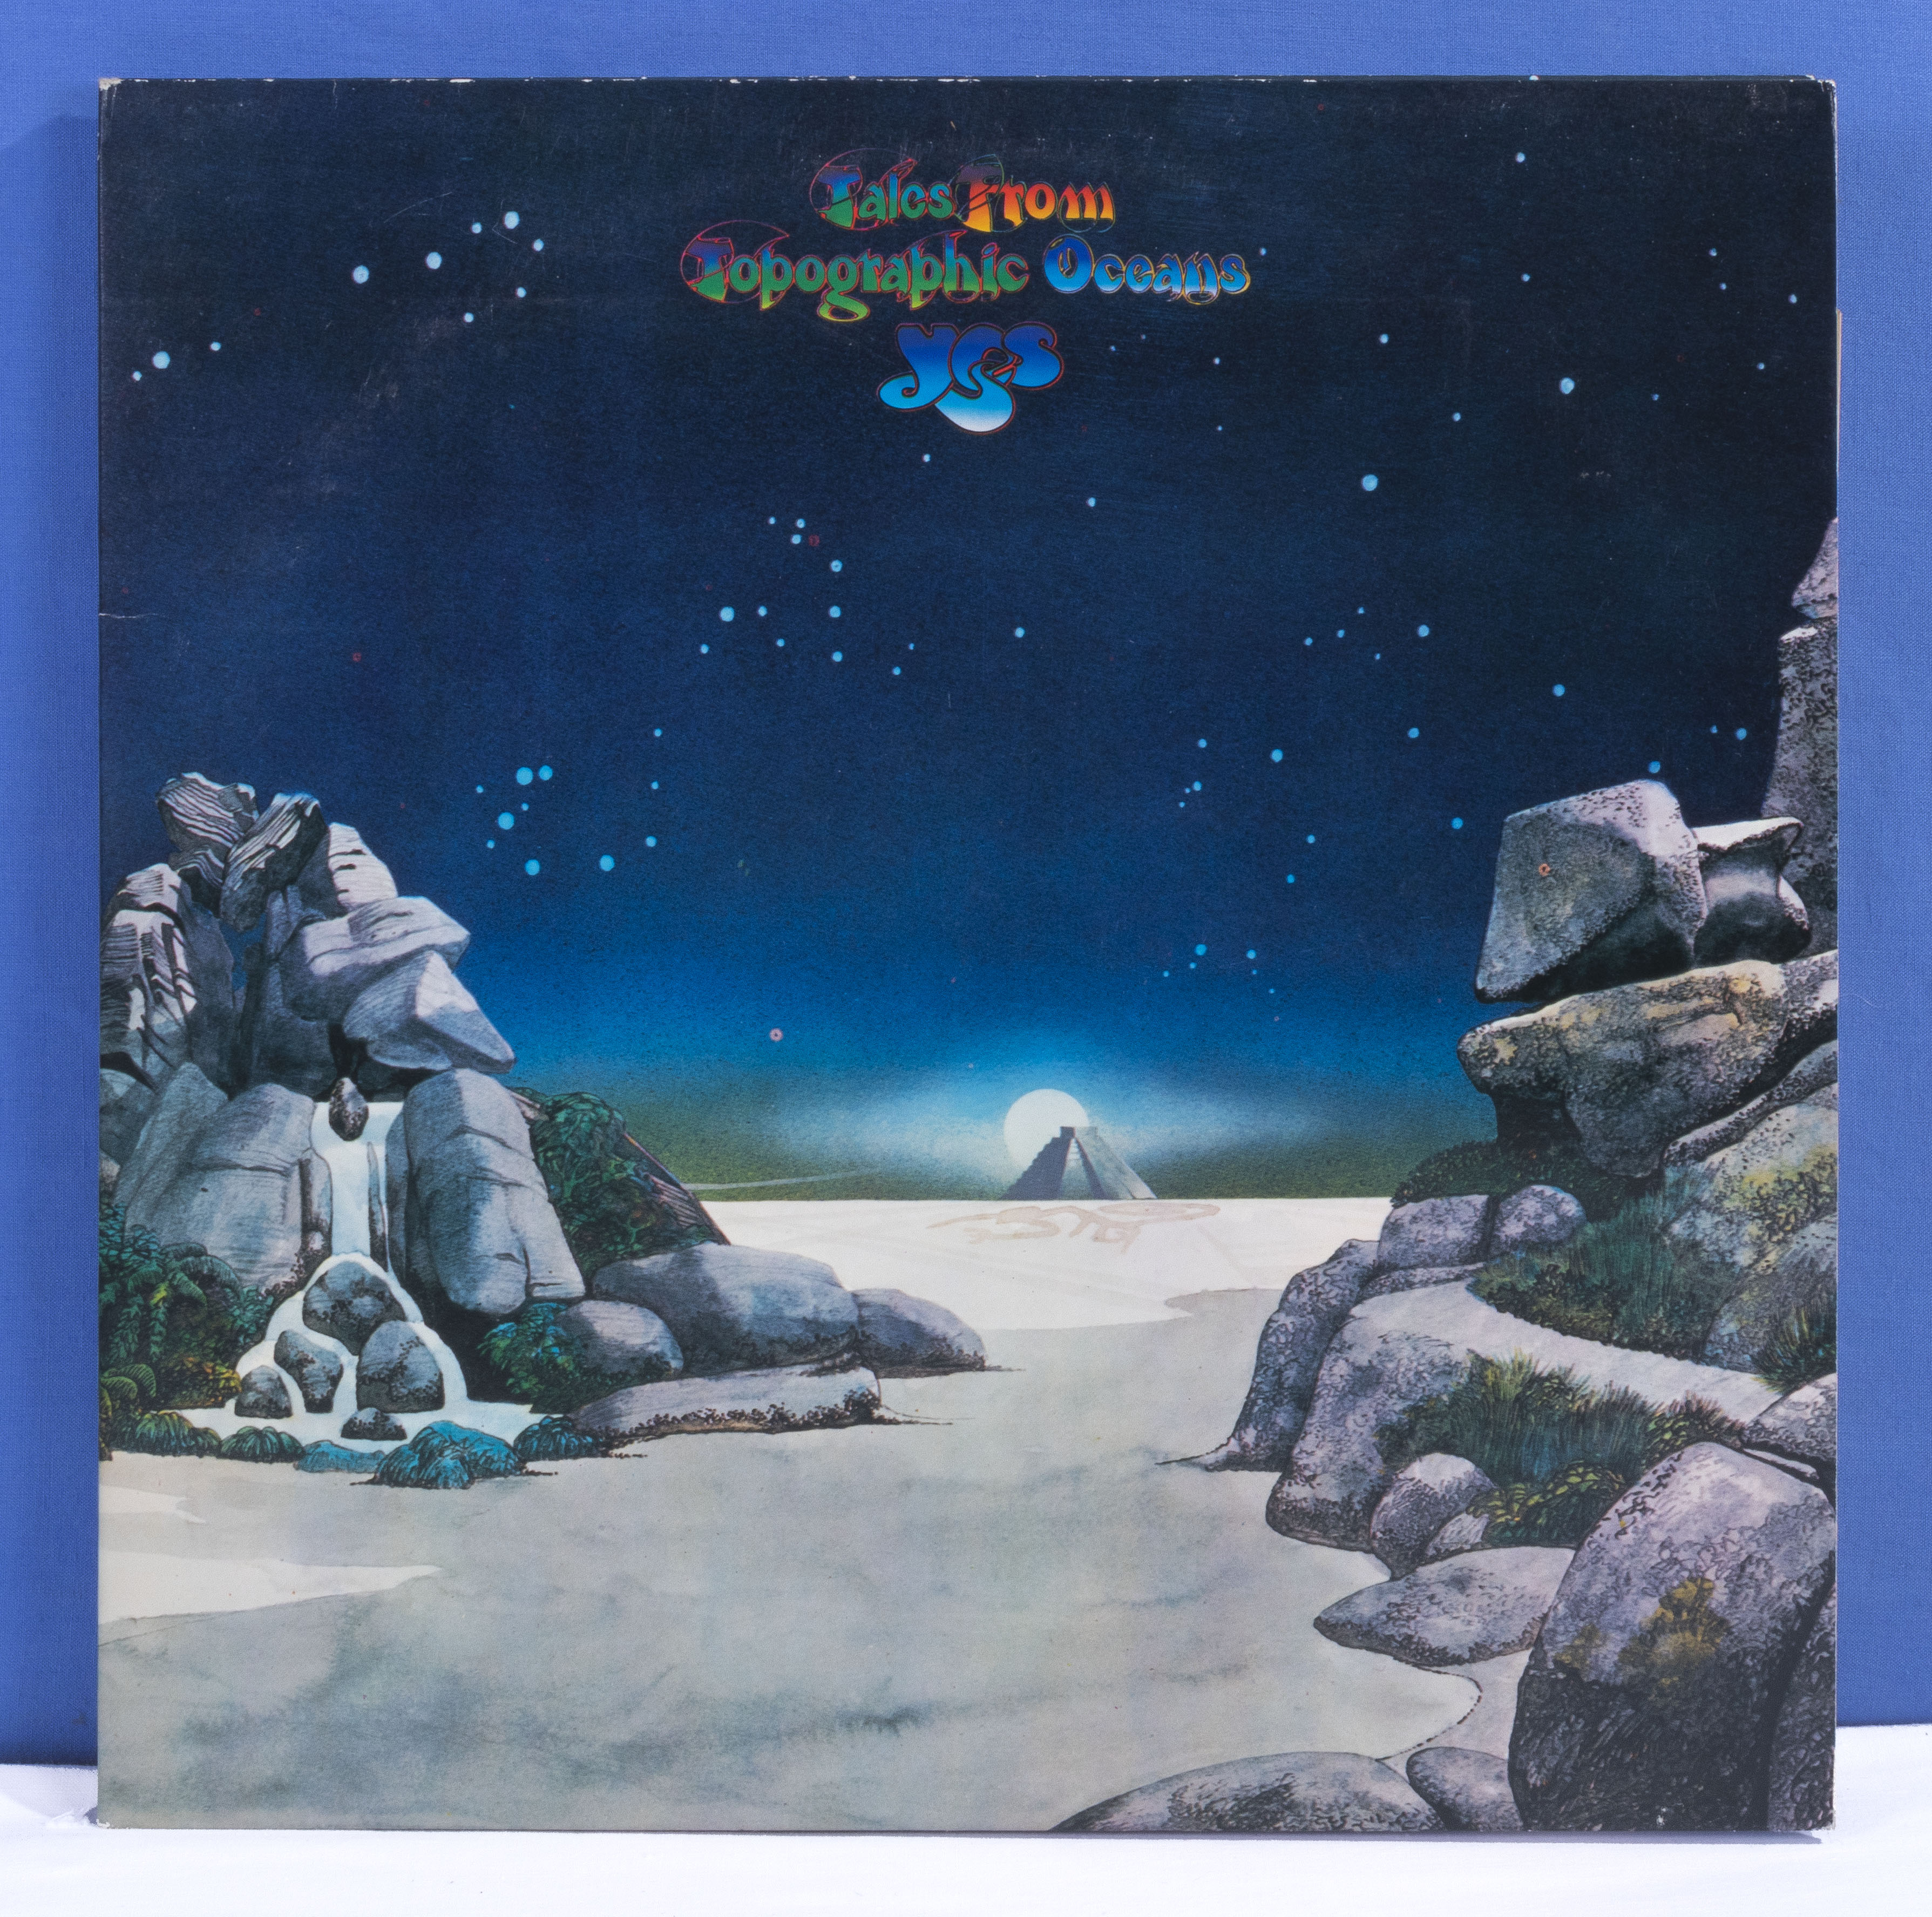 Yes - a copy of double album Tales from Topographical Oceans, Atlantic Records K 80001,